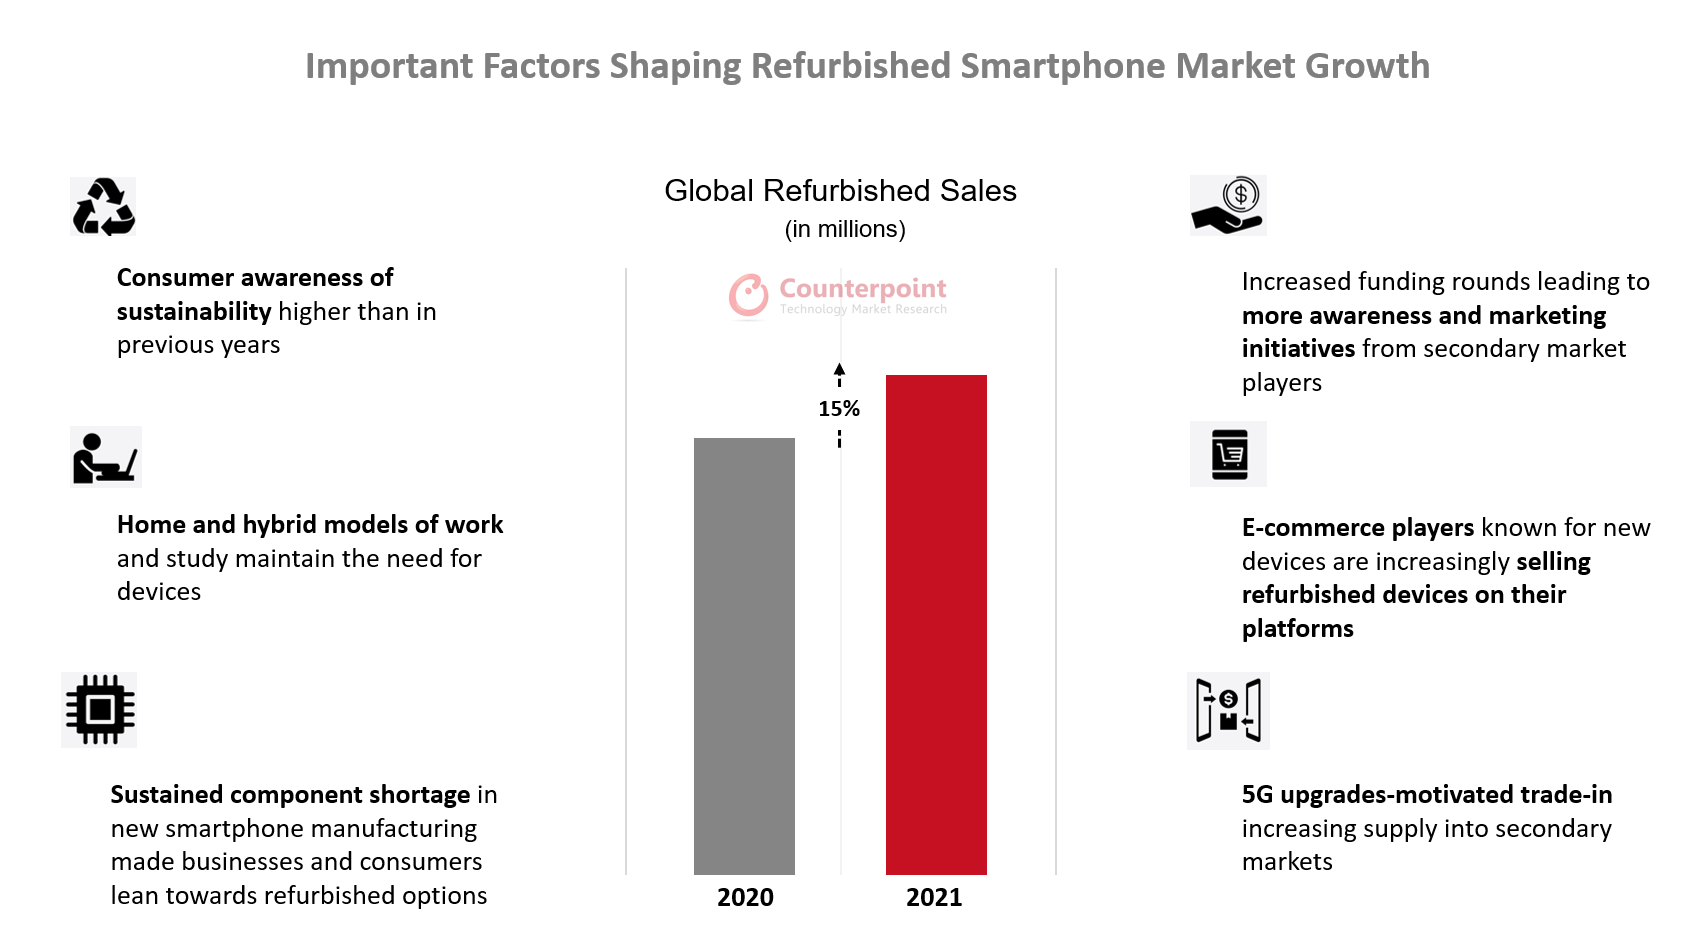 Important Factors Shaping Refurb Smartphone Market Growth